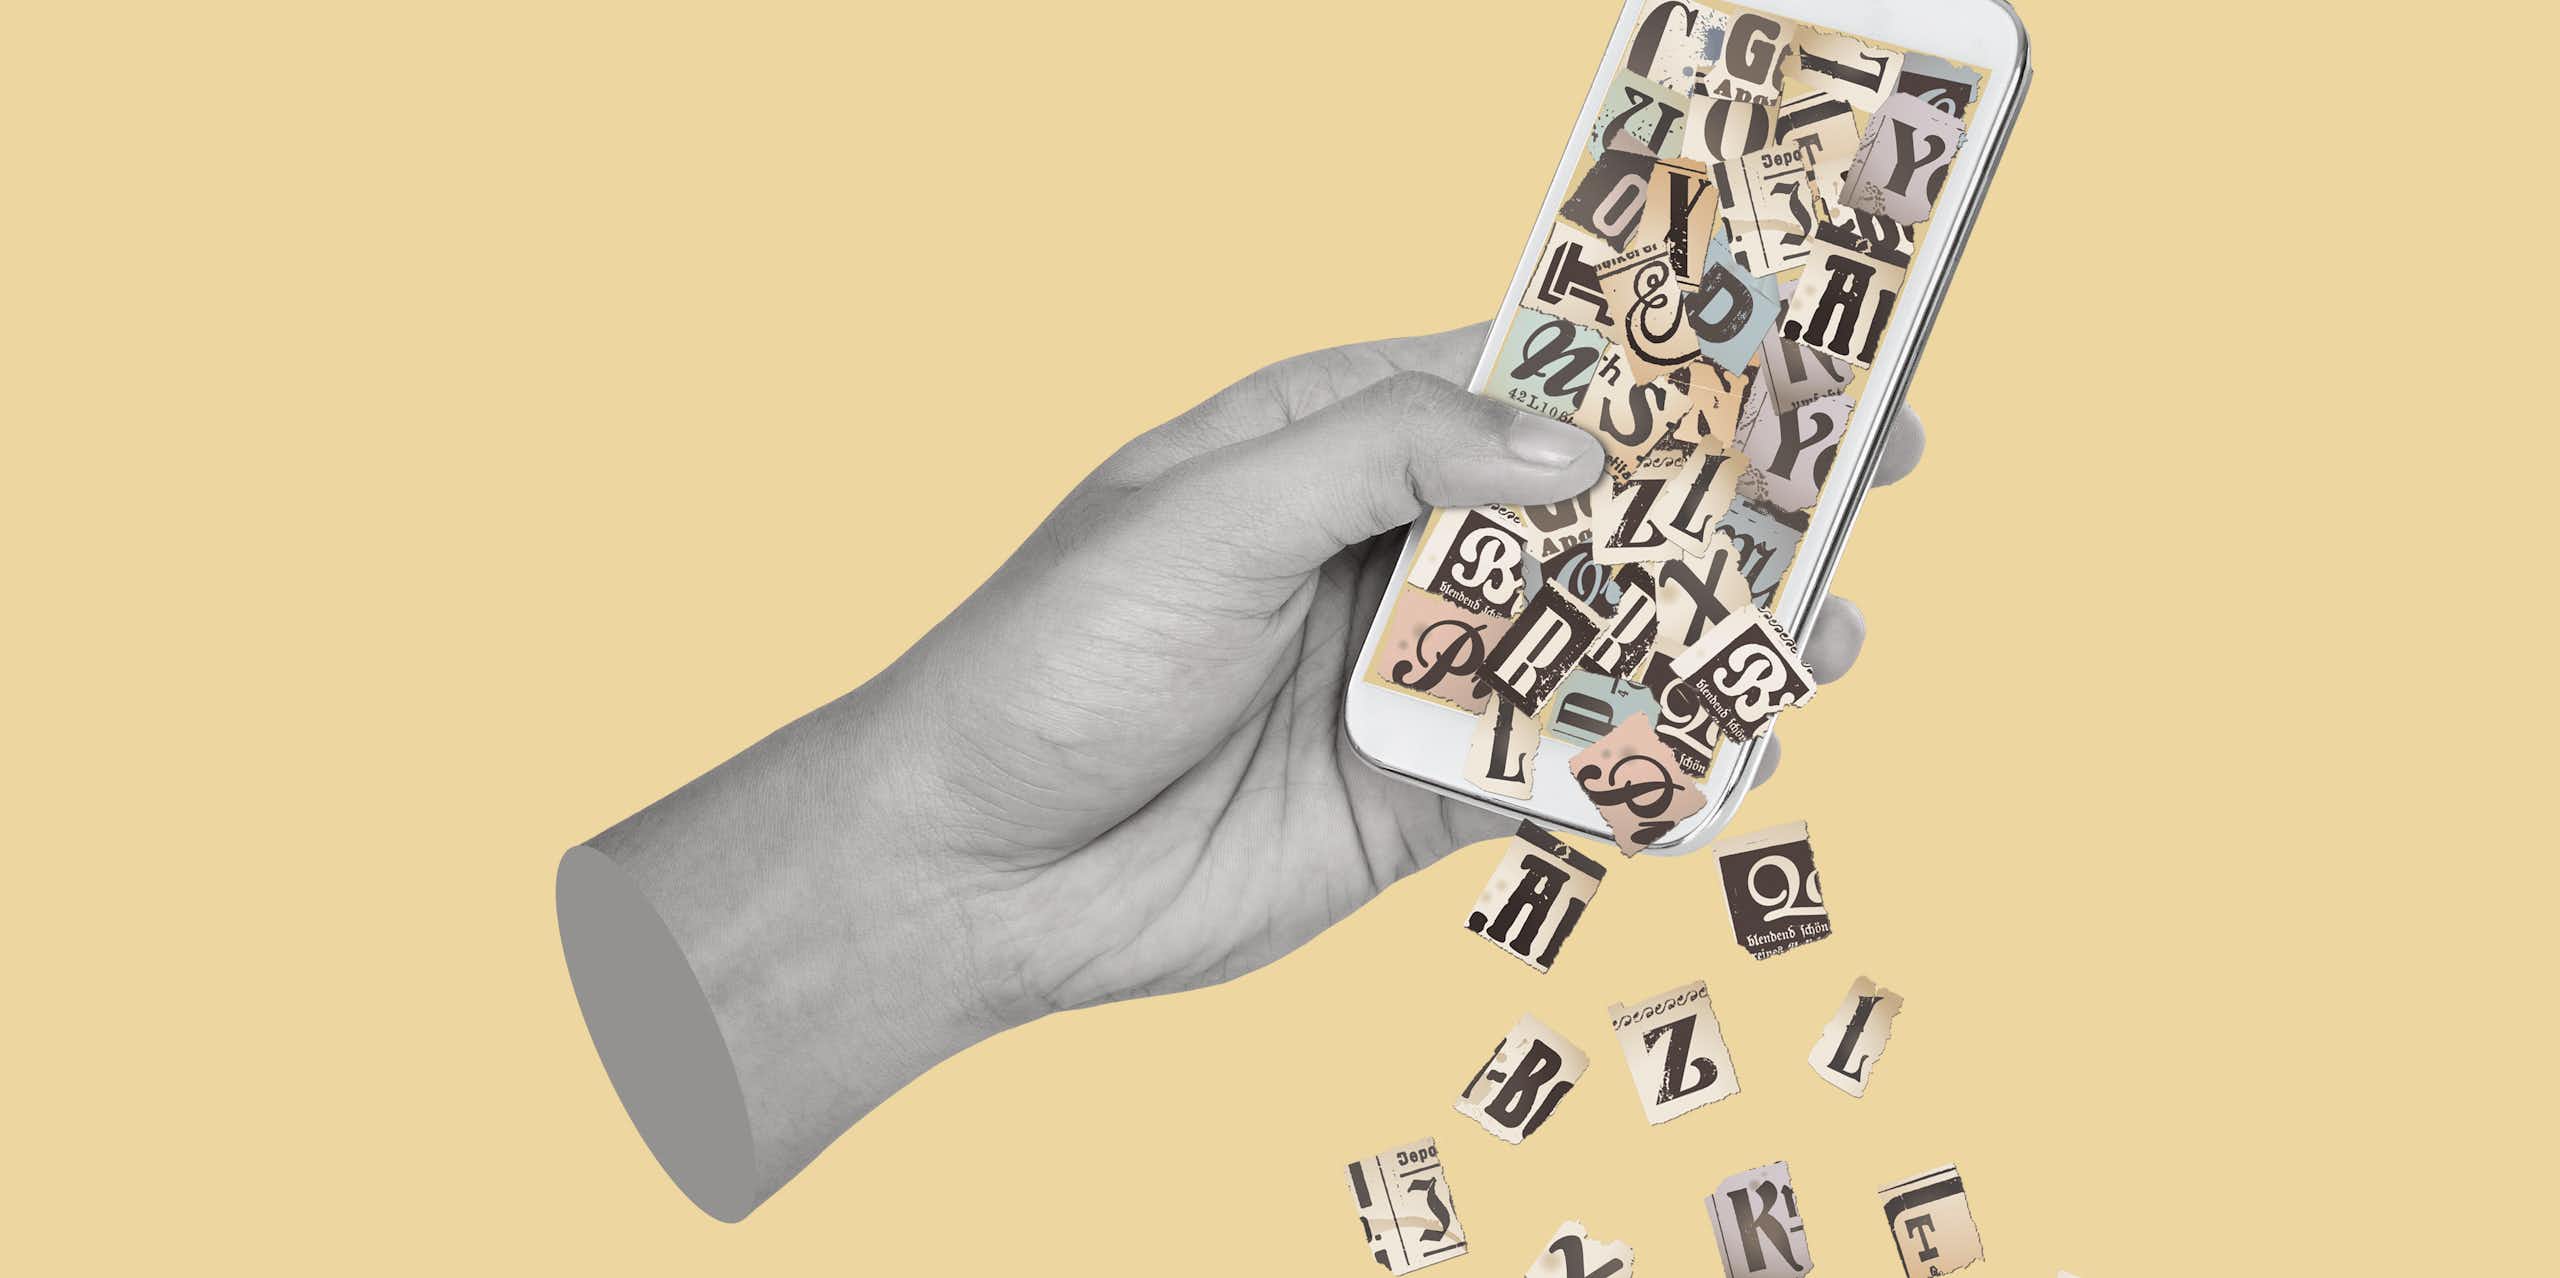 Graphic of hand holding a smart phone with newspaper headline cutouts tumbling from the screen.